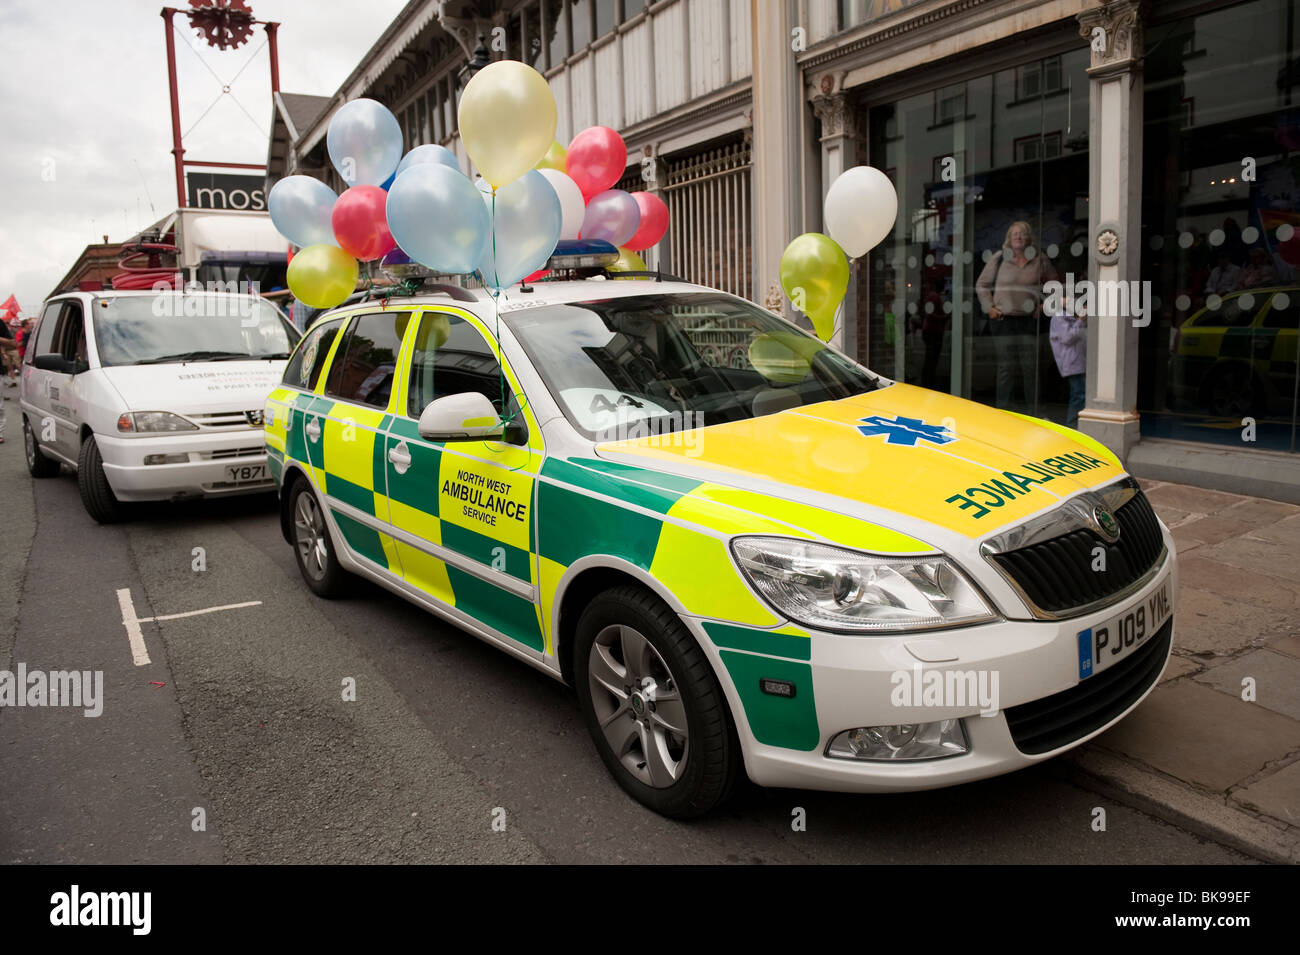 Northwest Ambulance car with Balloons on for Gay Pride Event Stock Photo